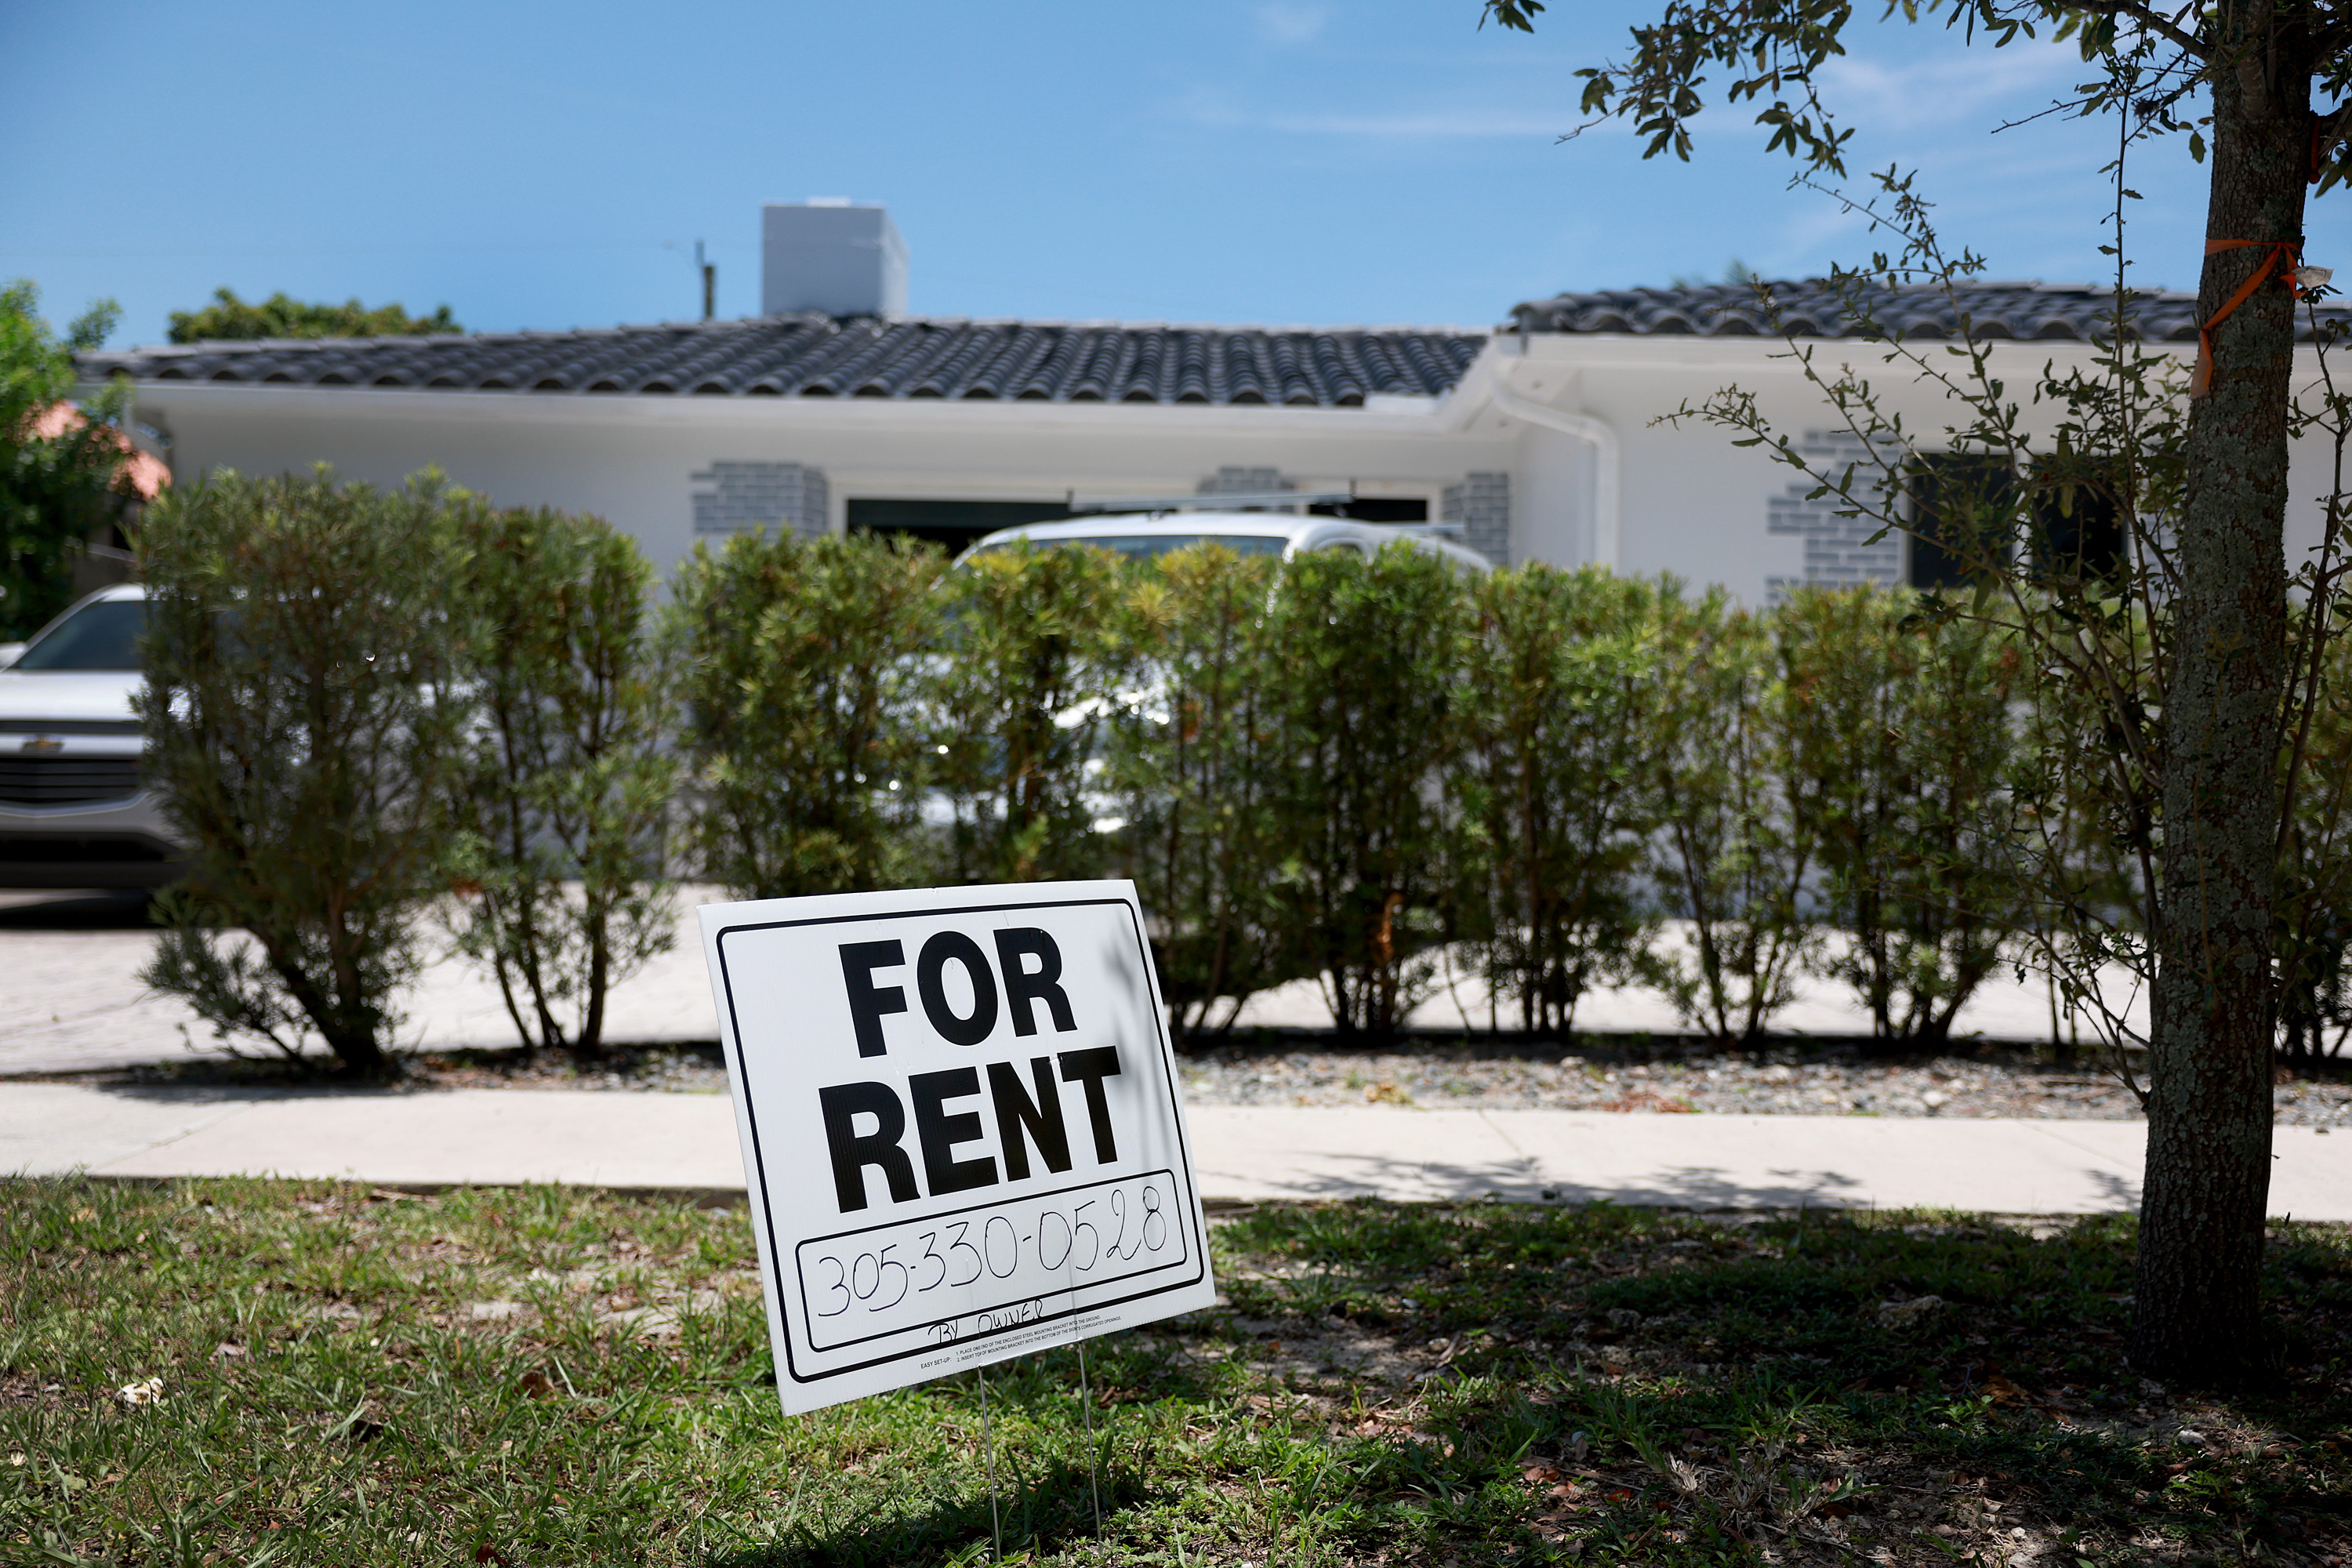 renters lose hope over housing market